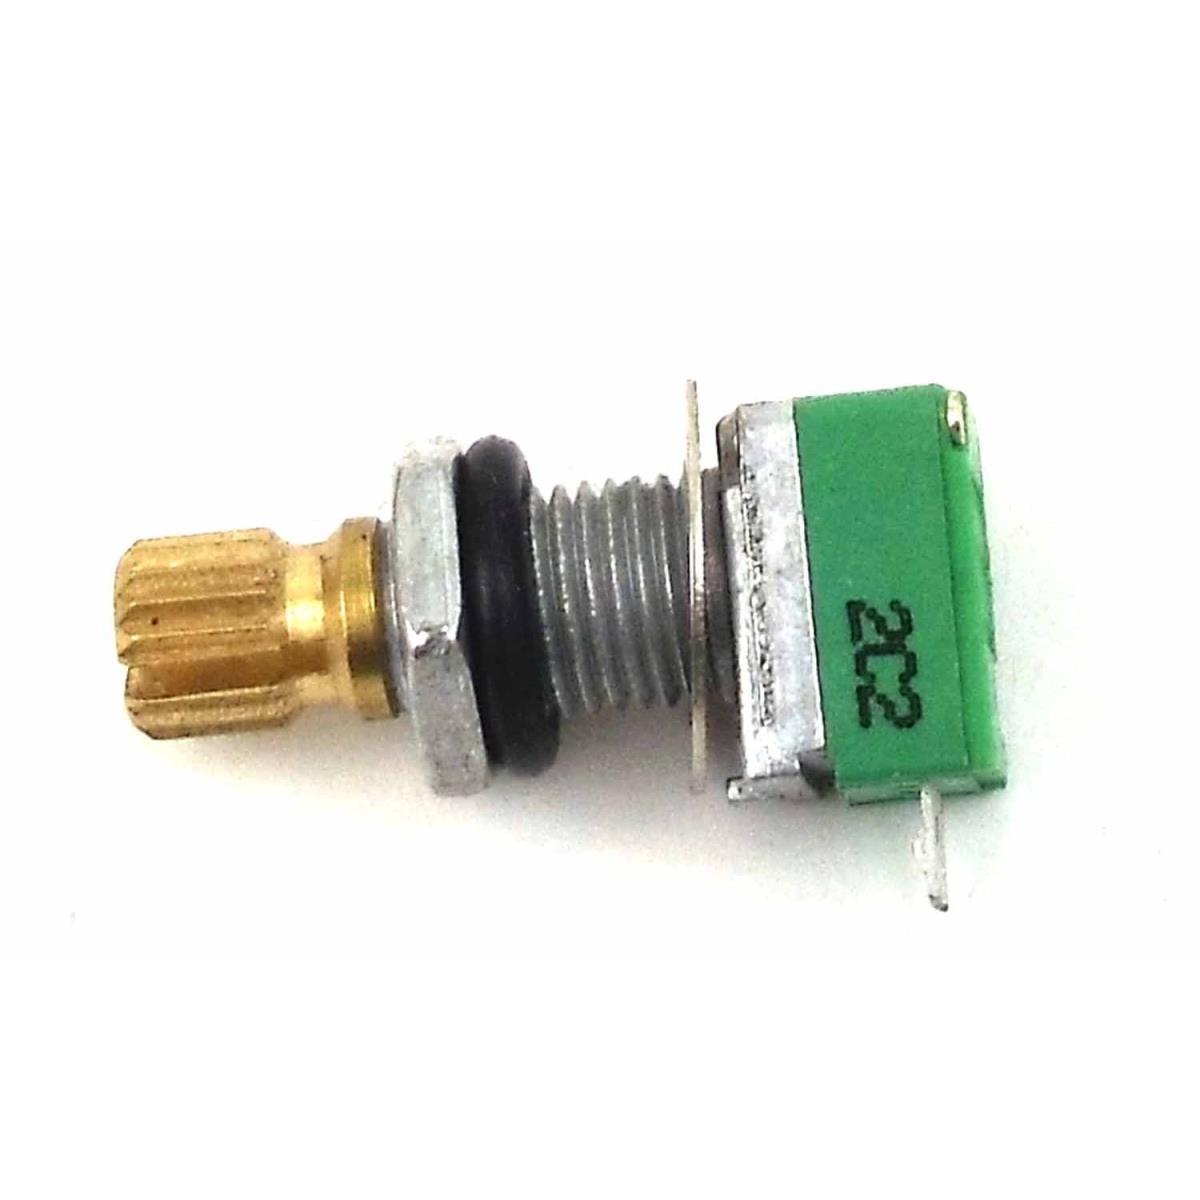 Picture of Cobra 008040 Internal Squelch Potentiometer for MRF75D